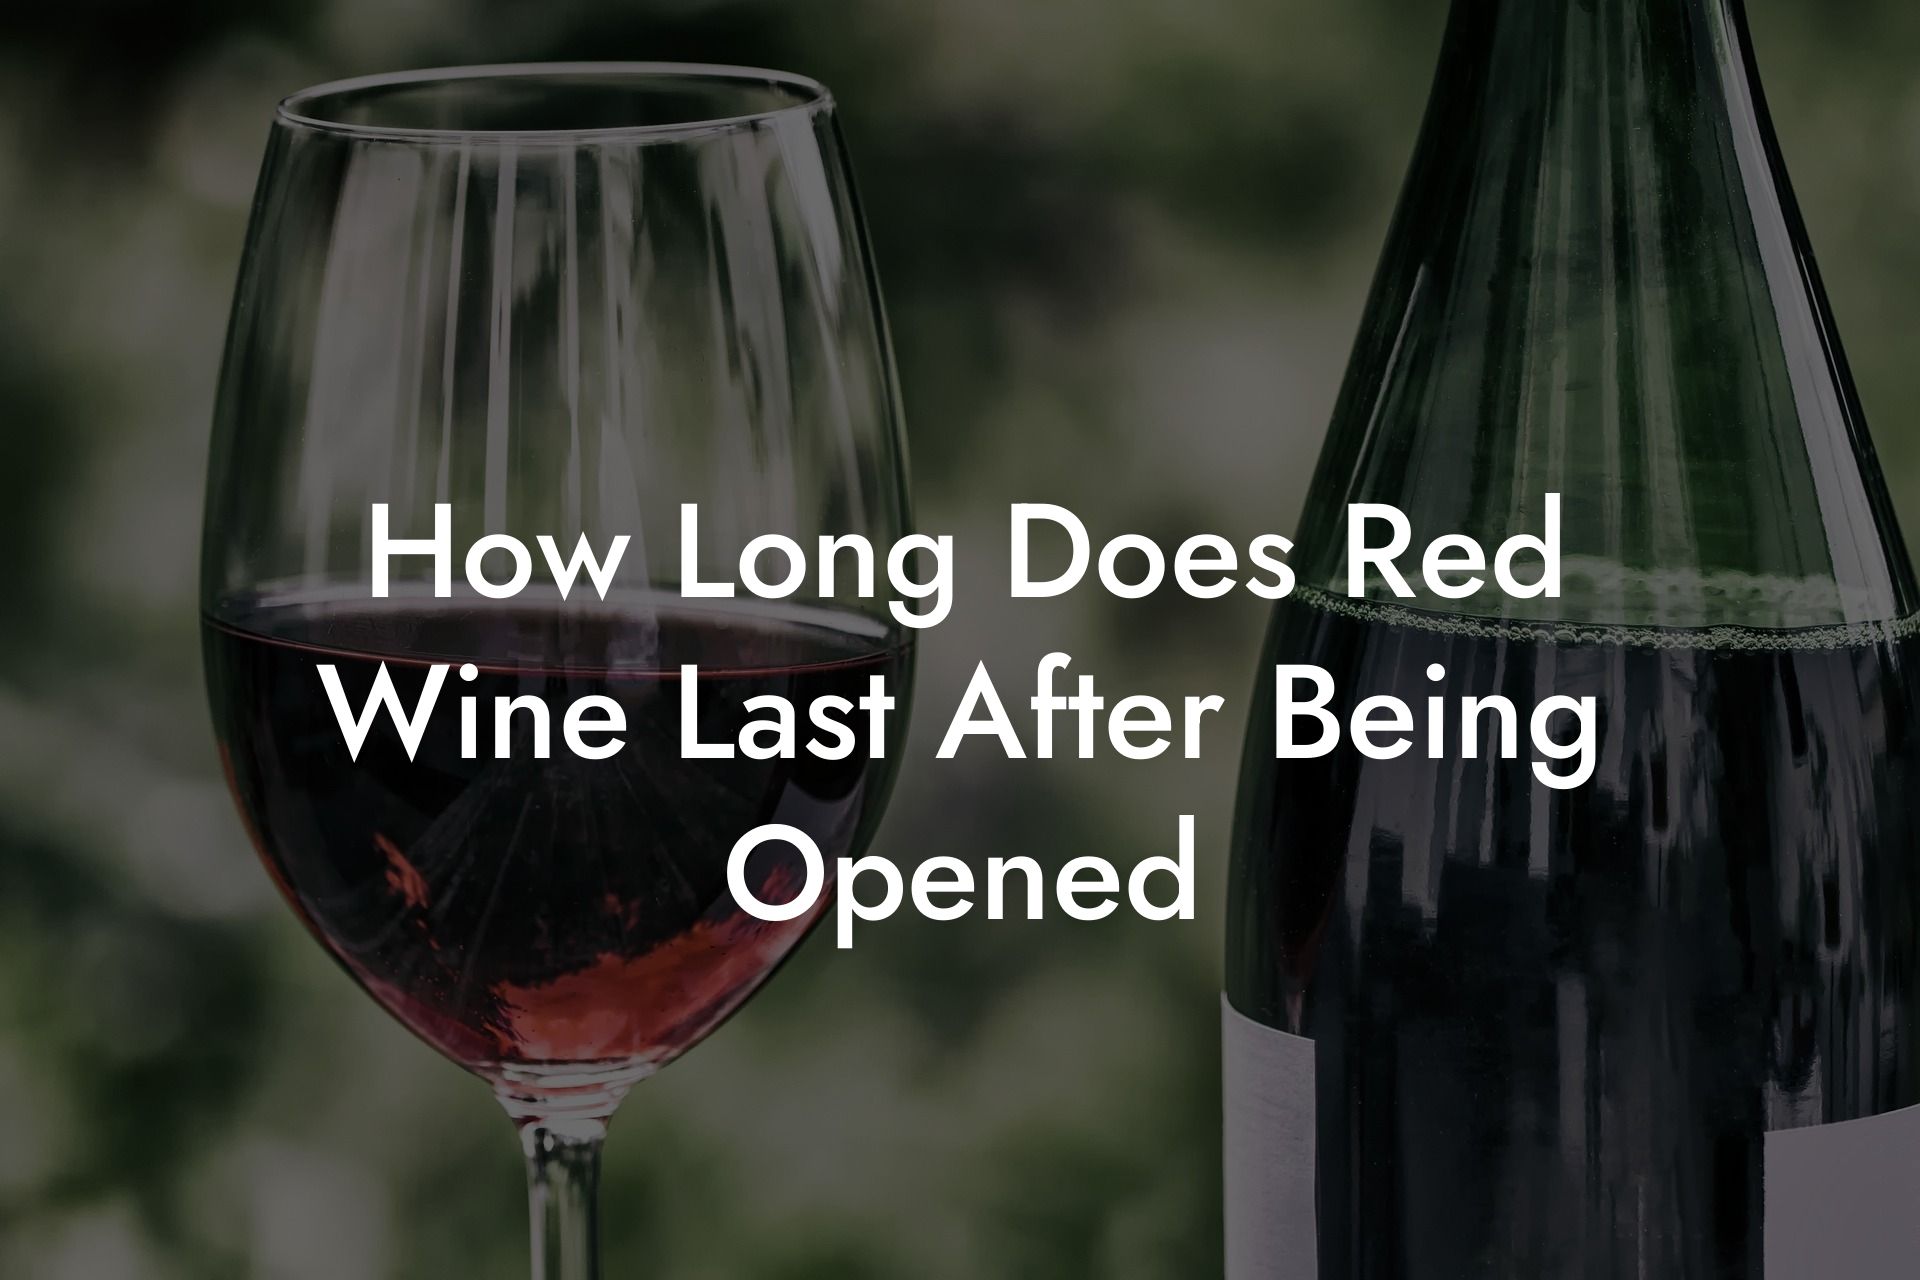 How Long Does Red Wine Last After Being Opened